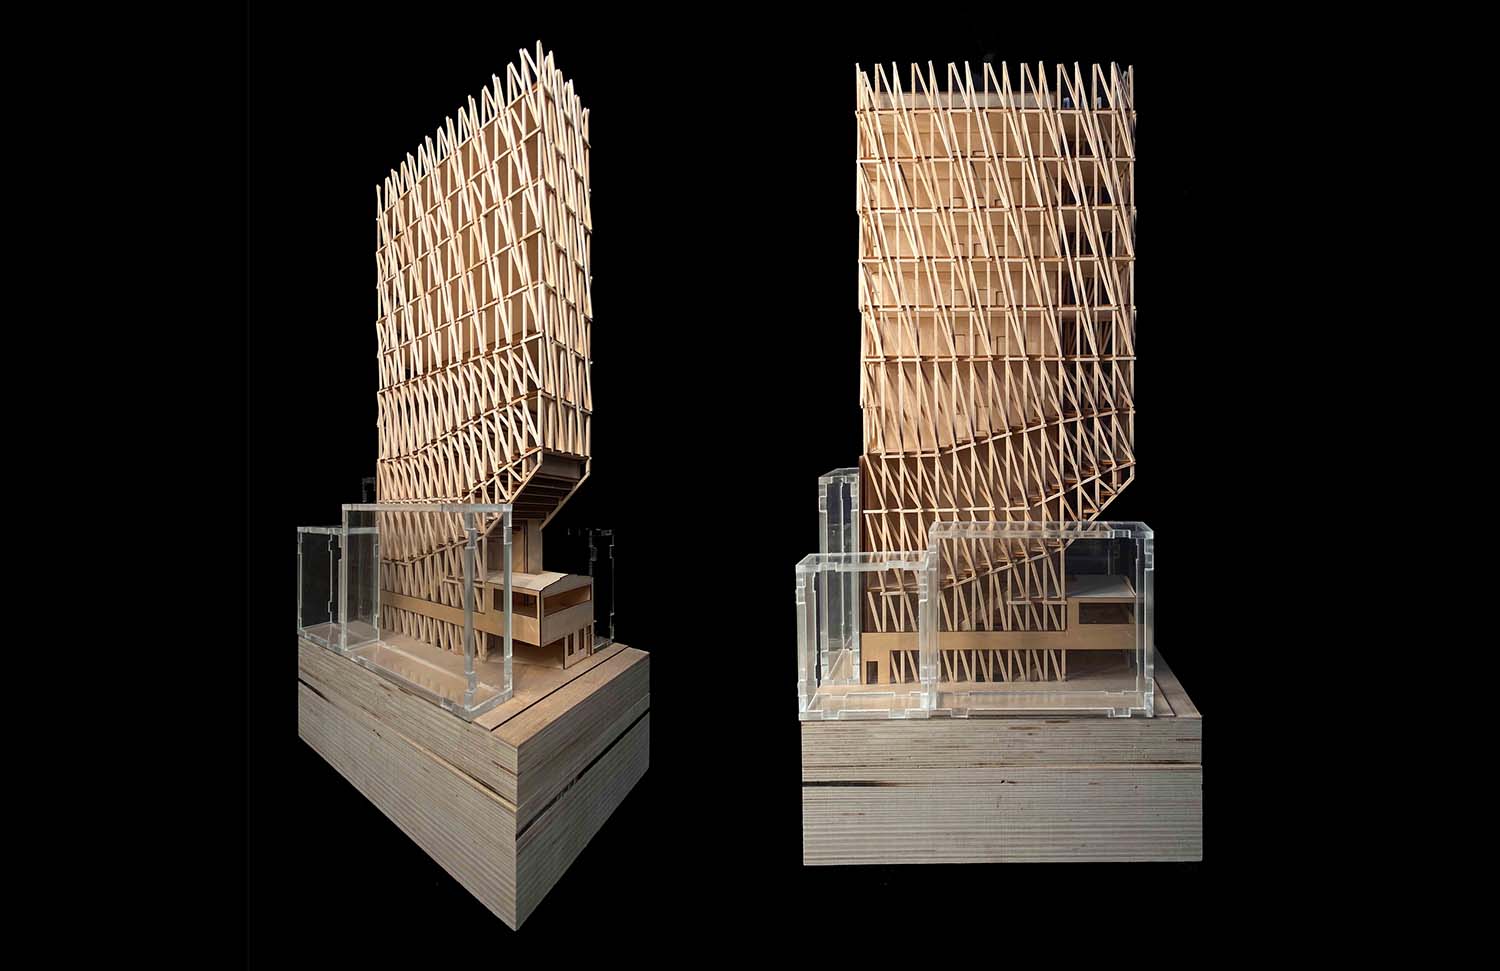 The Matchstick, celebrating wood constructive systems